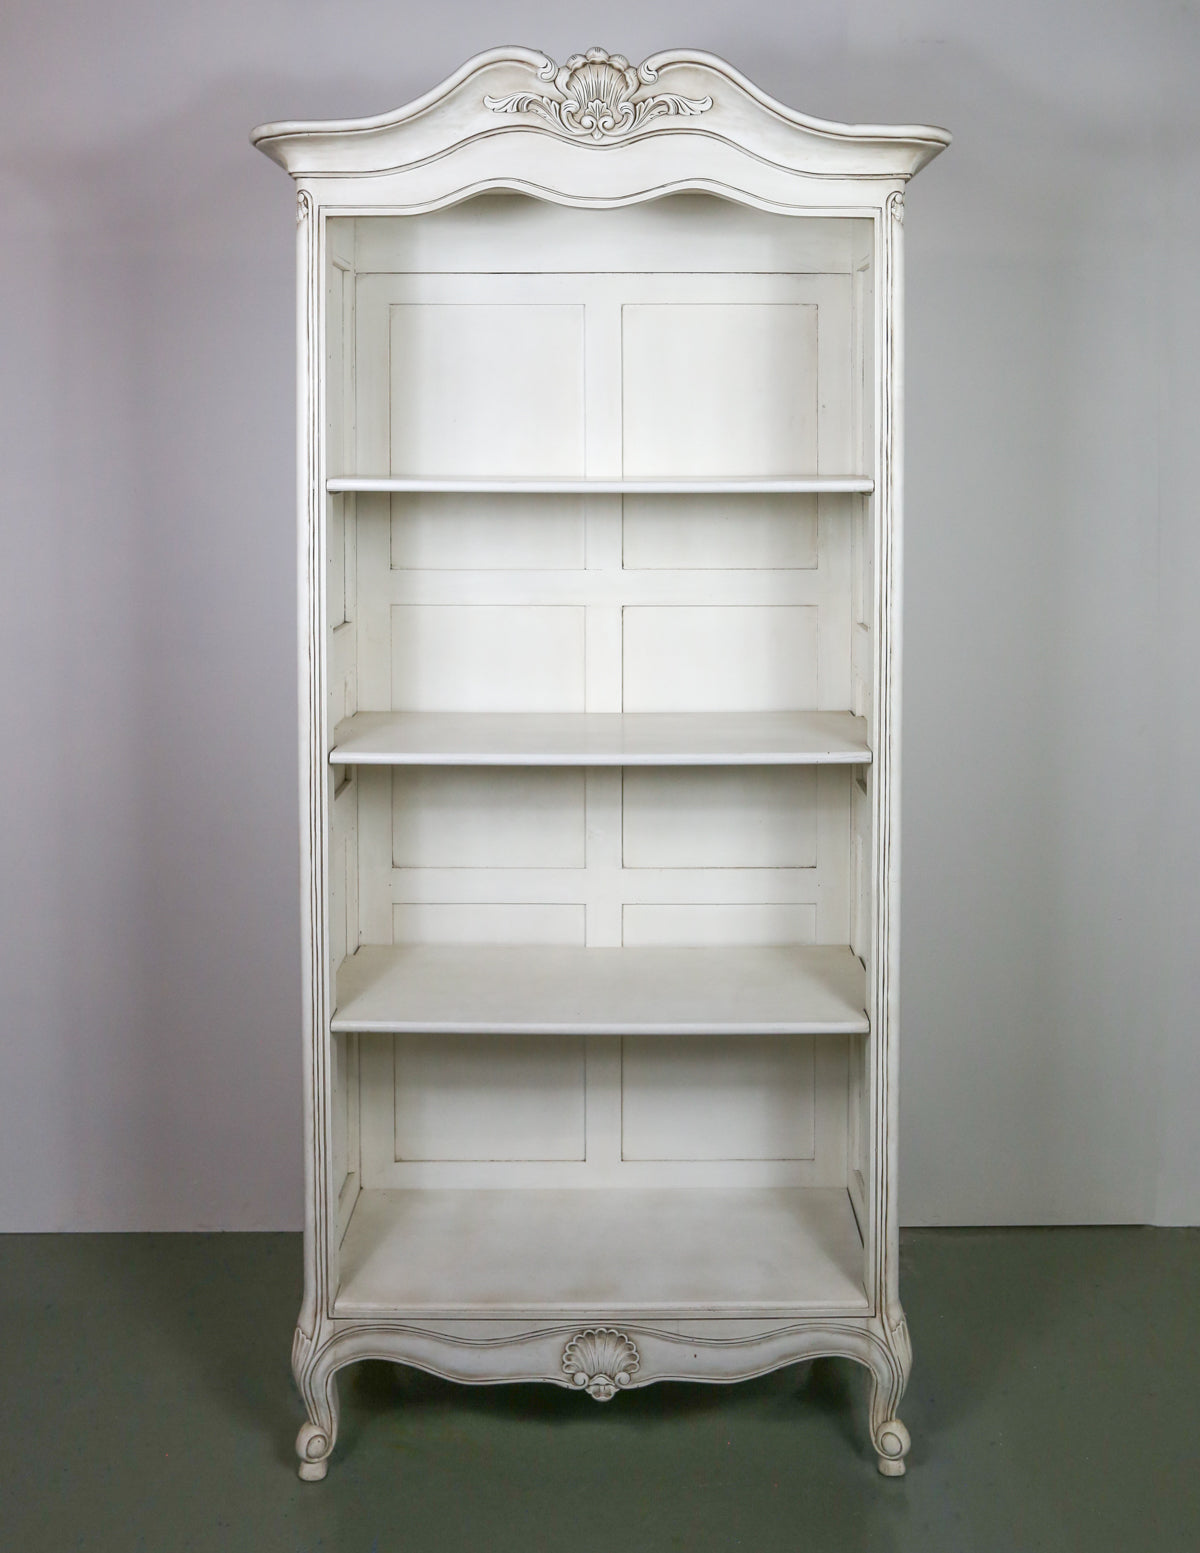 French Inspired Shelving Unit